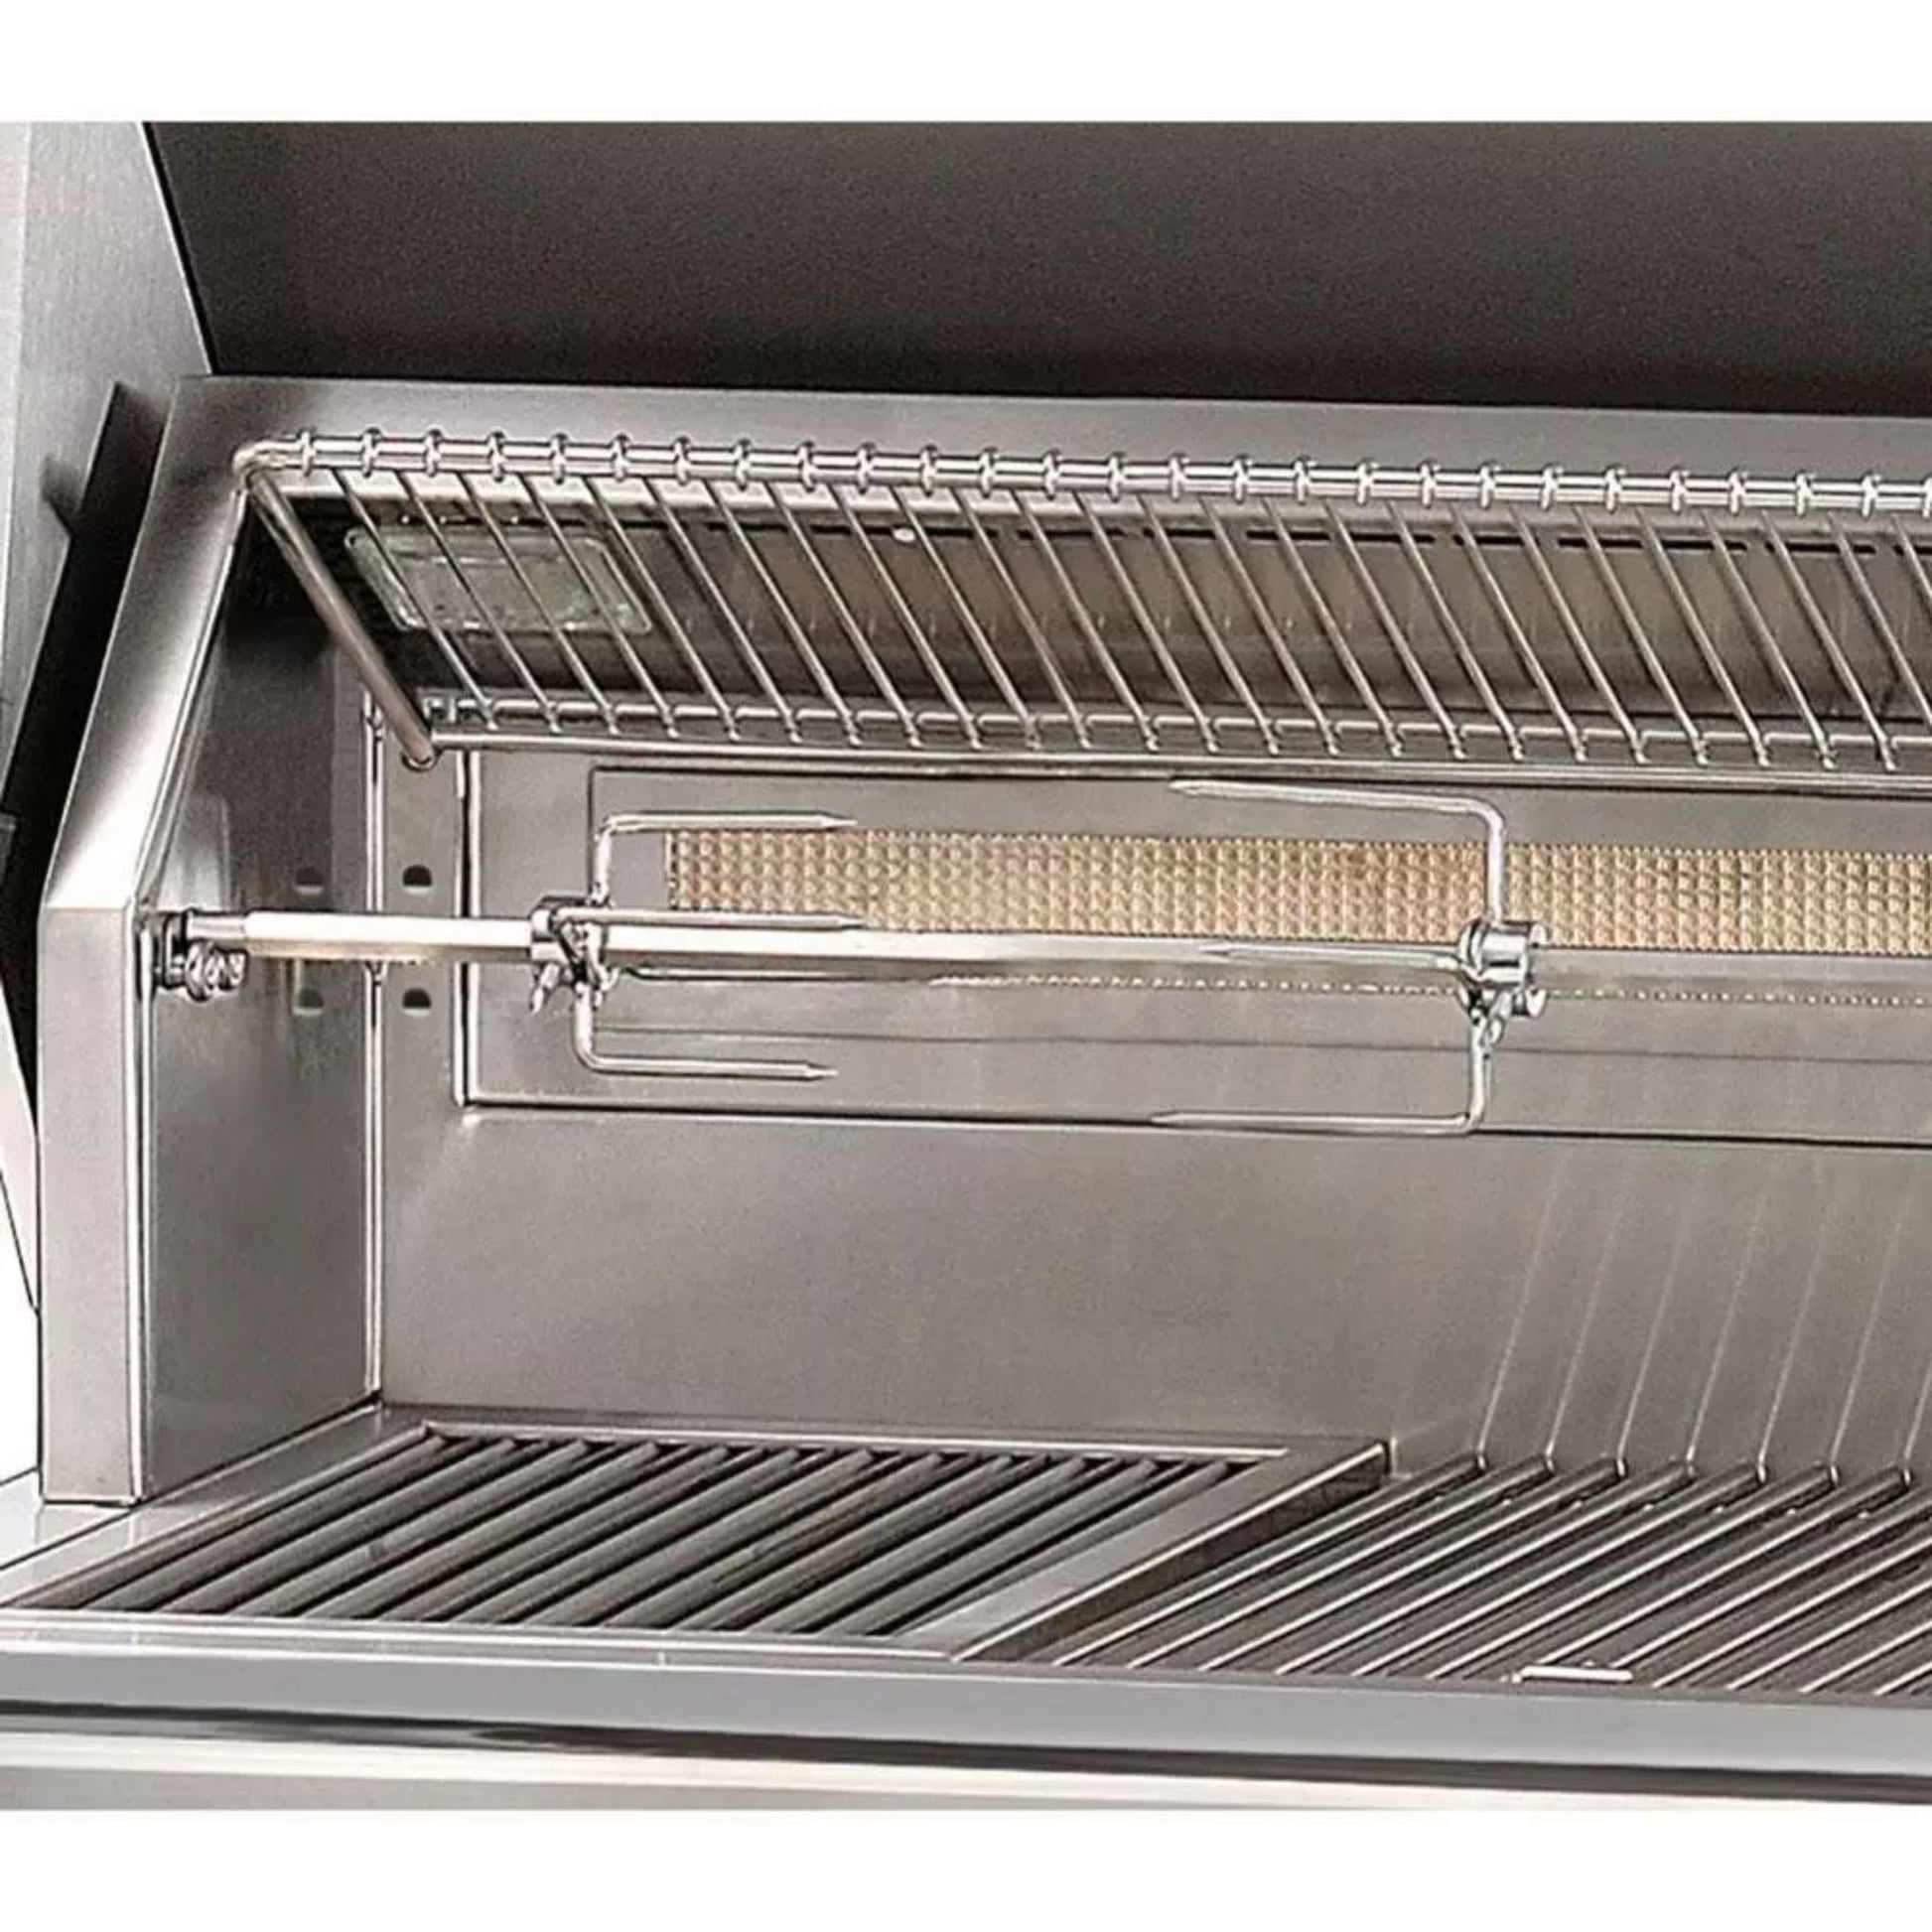 Alfresco Luxury 42" Blue Lilac Gloss Standard Grill Head 3 Burner Natural Gas Built-In Grill